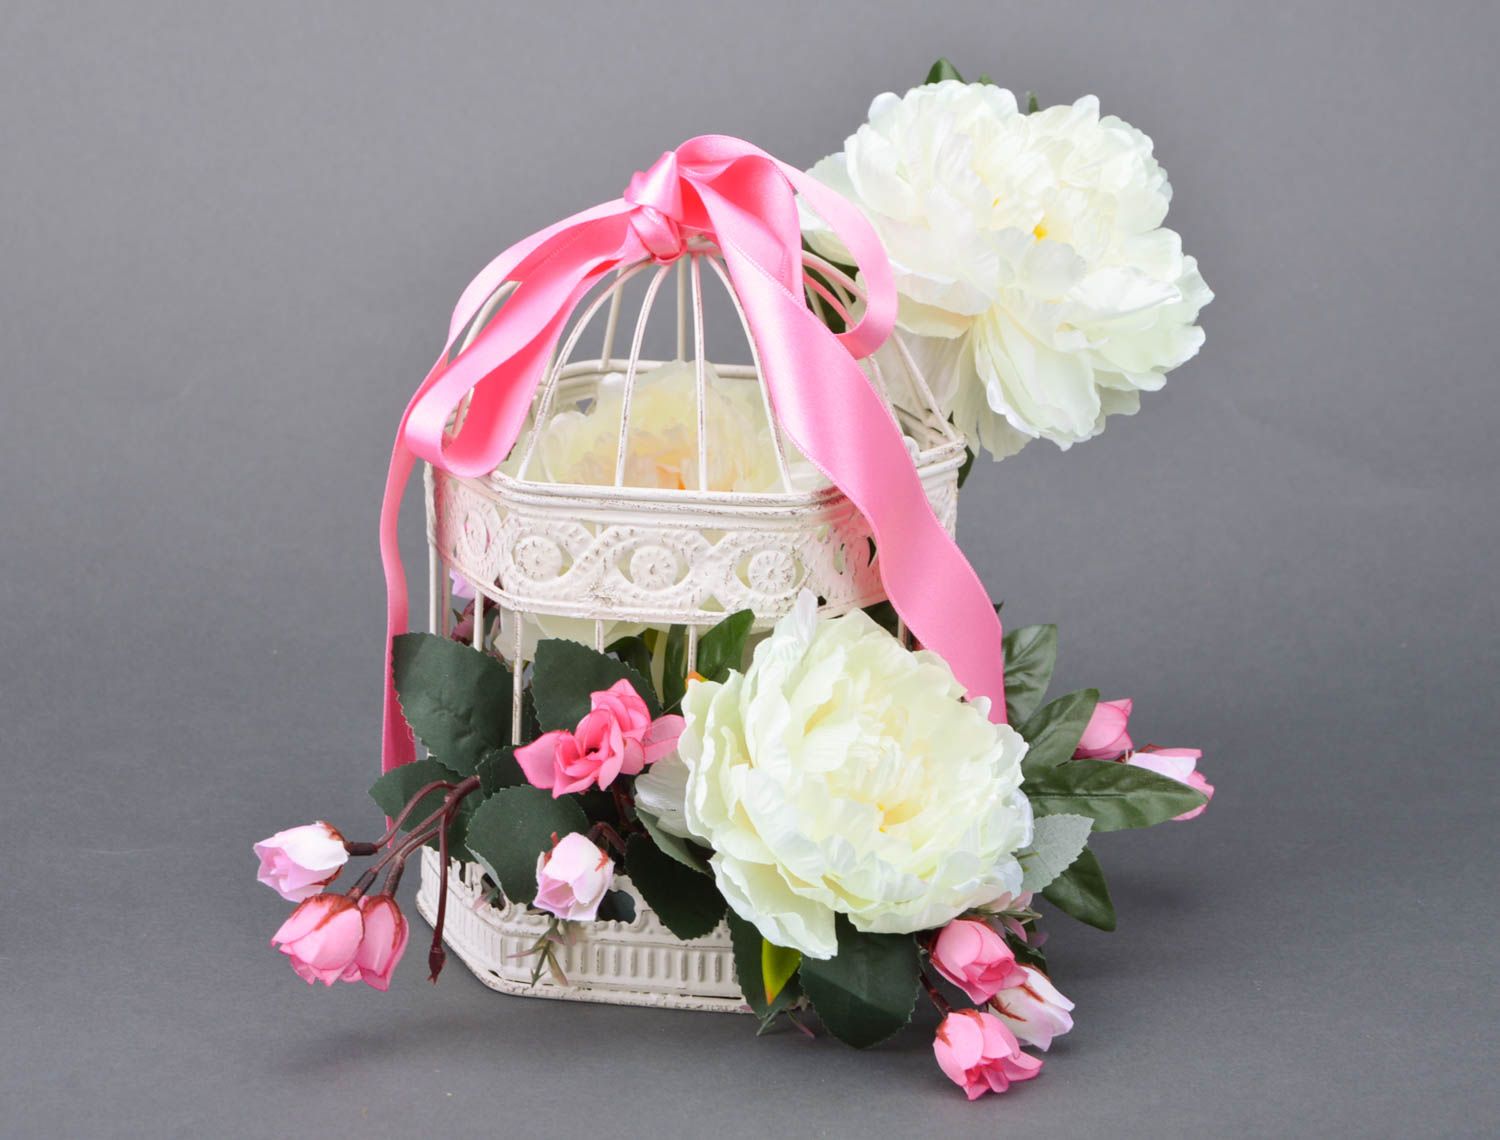 Handmade decorative cage with flowers and ribbons white peony interior ideas photo 1